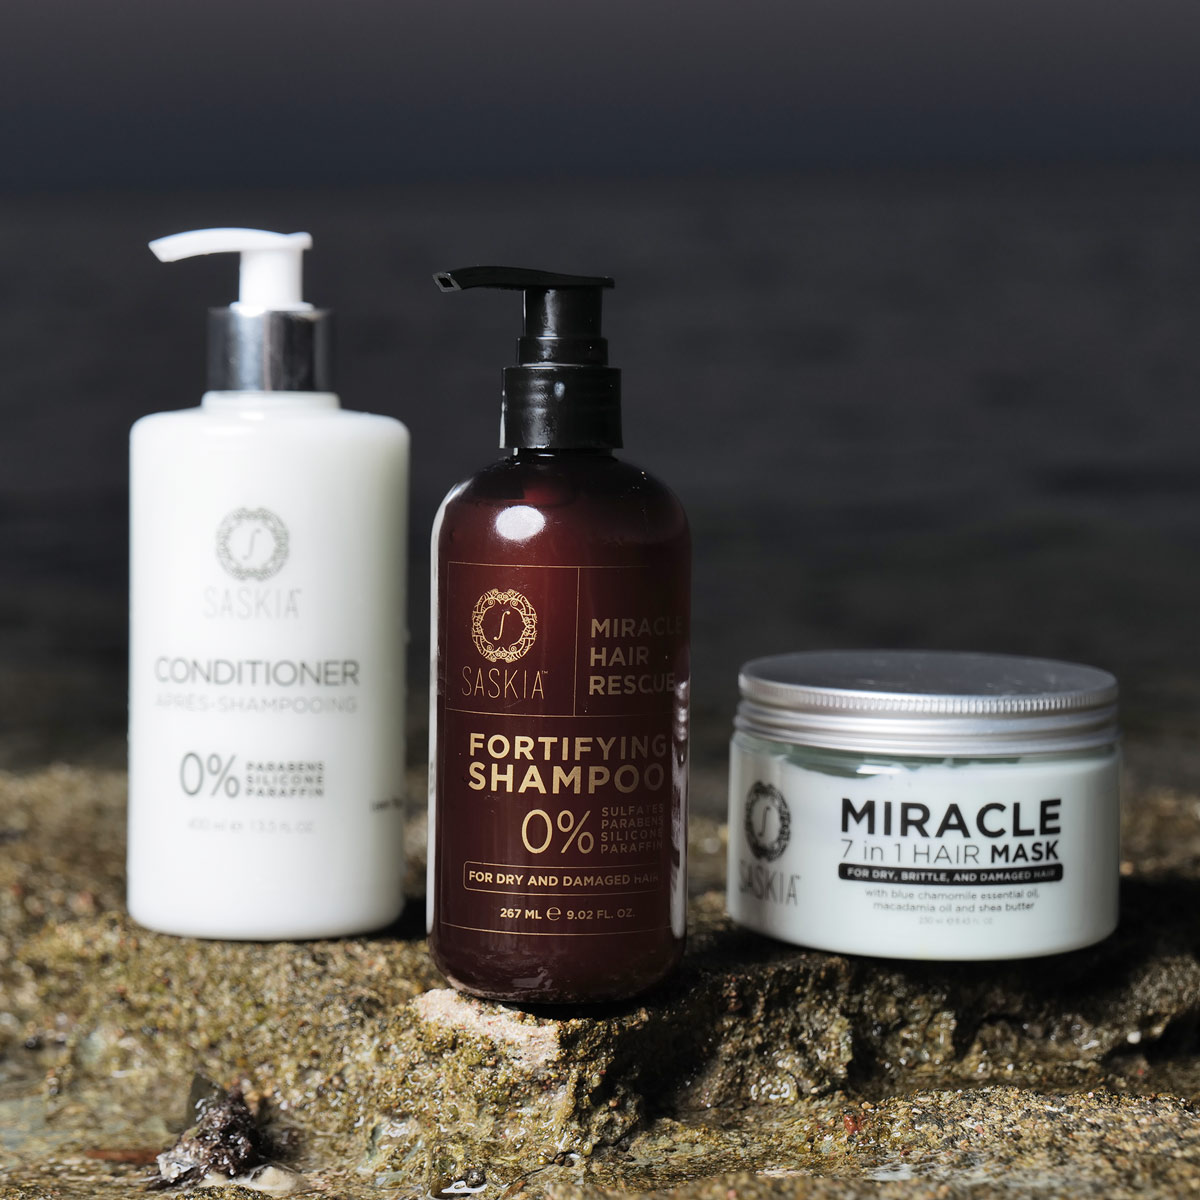 Miracle Hair Rescue collection